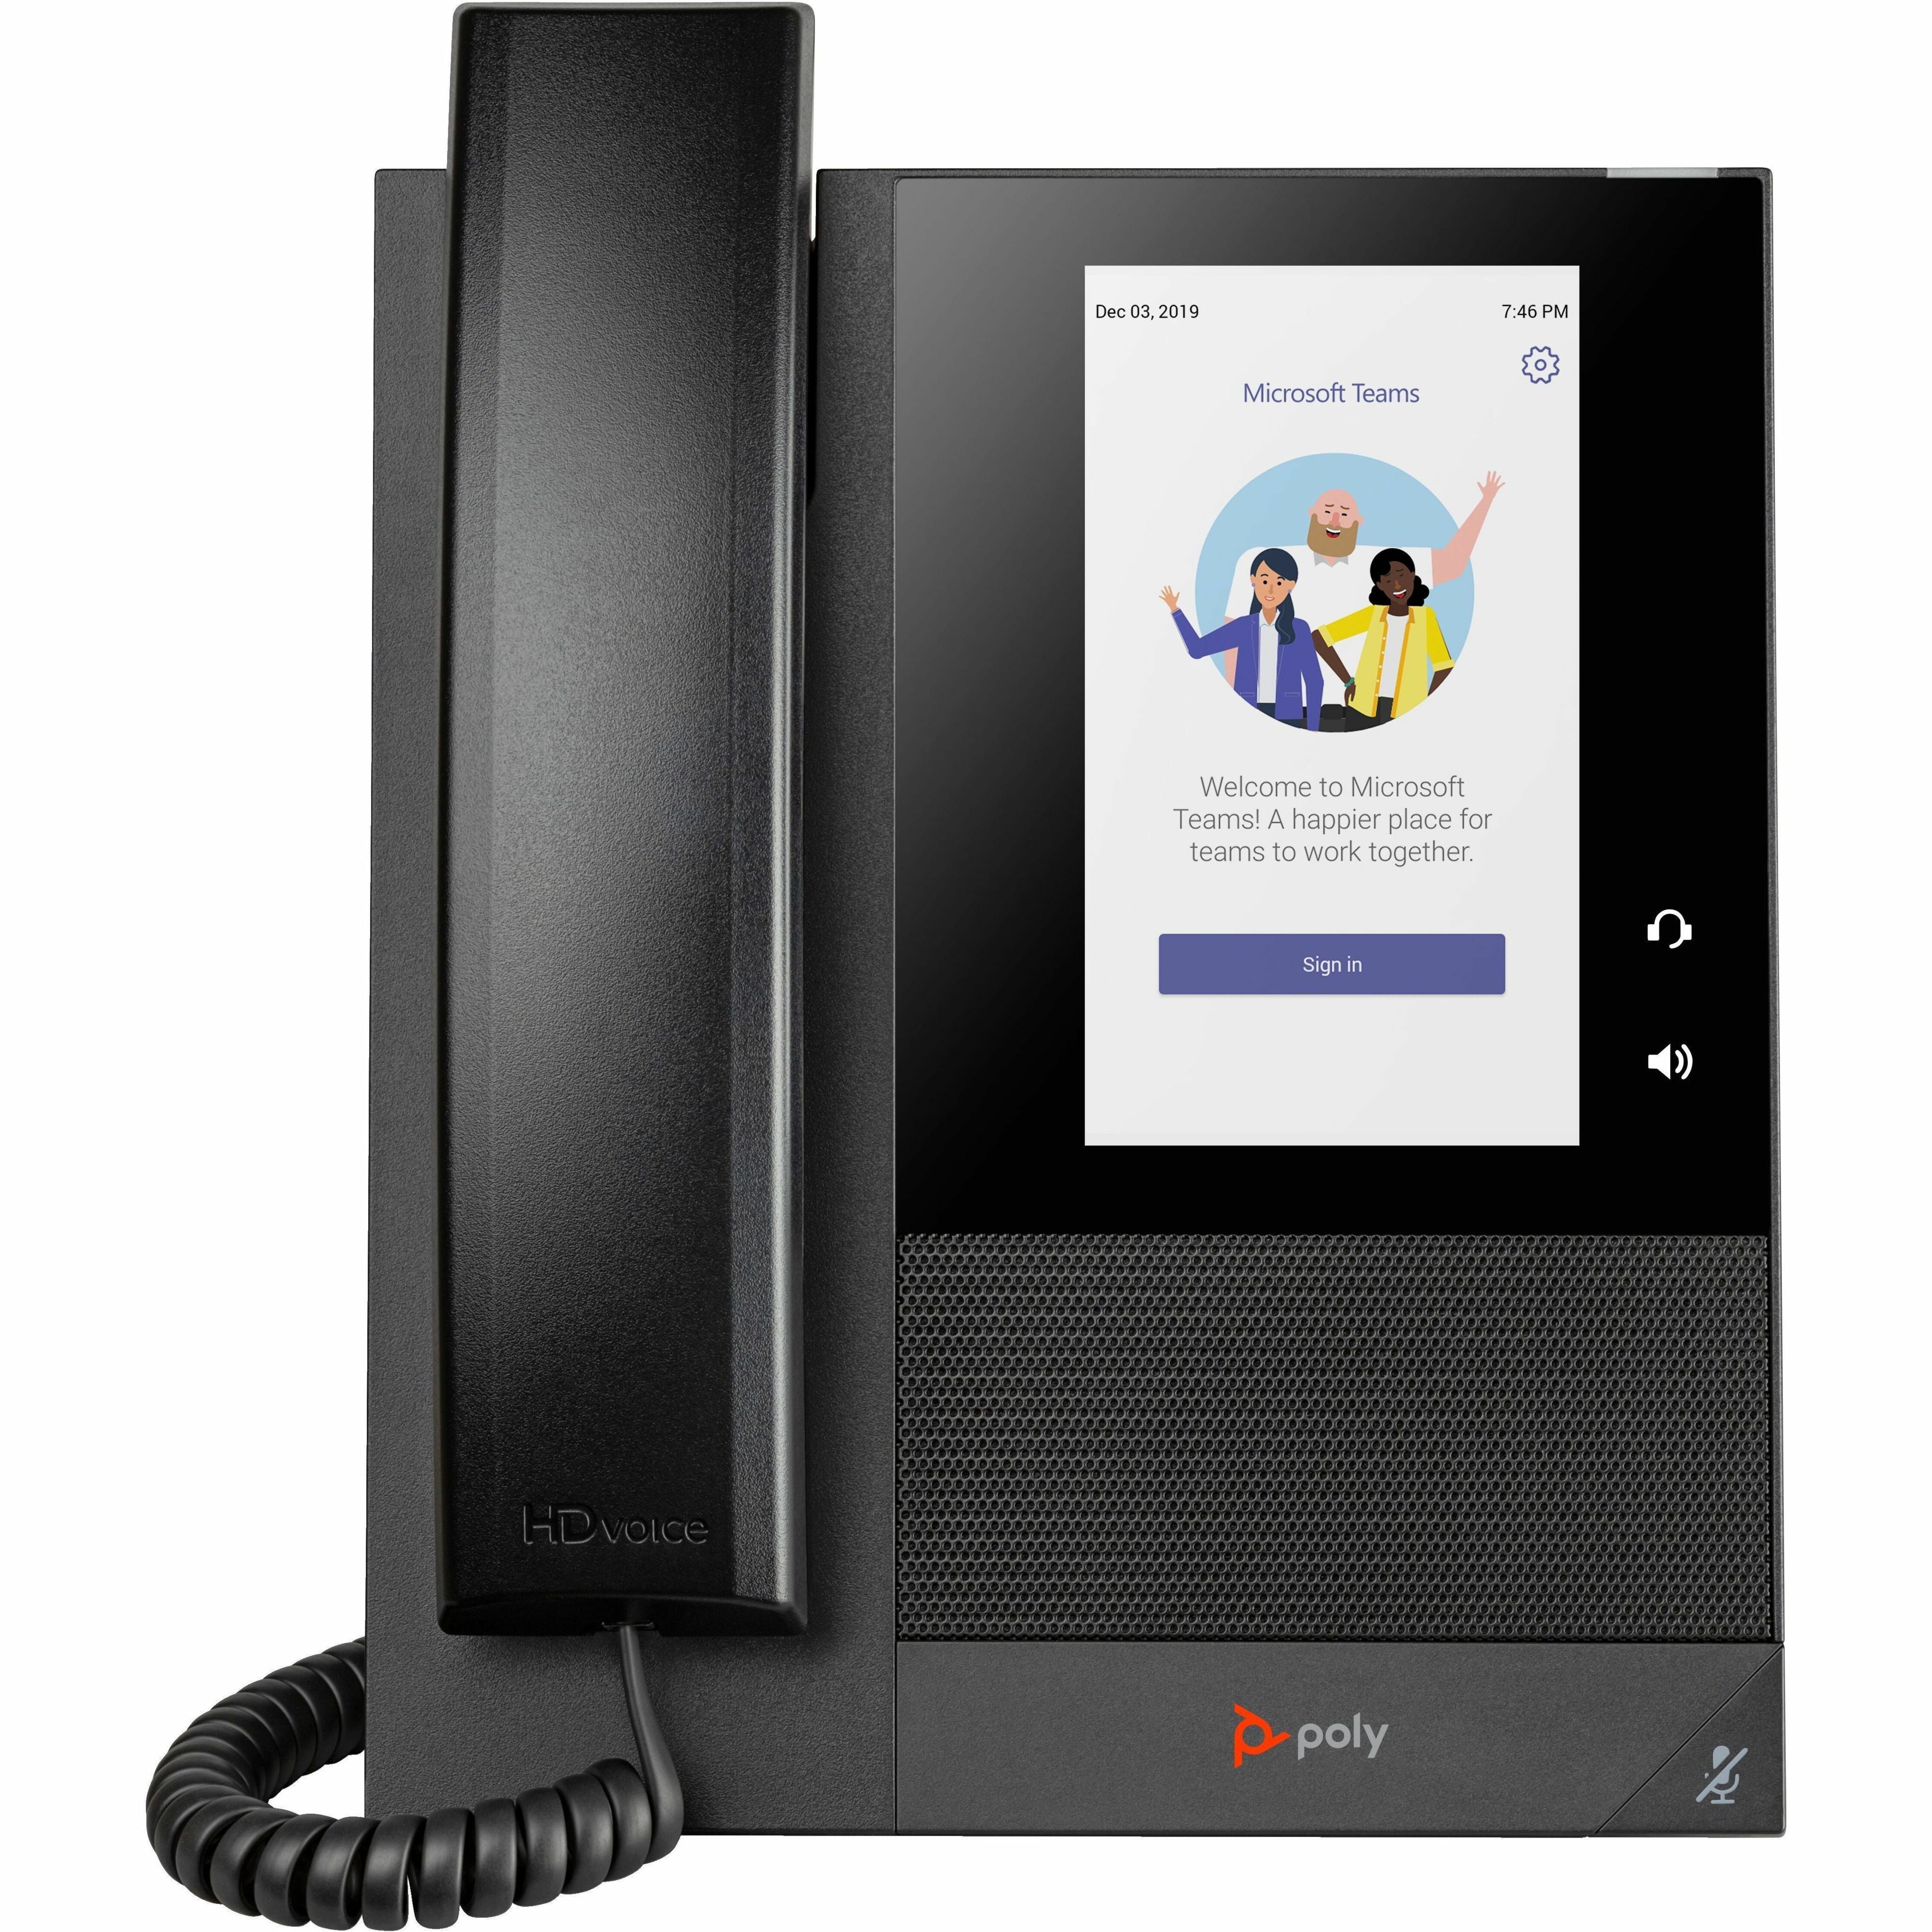 Poly 848Z8AA#AC3 CCX 400 Business Media Phone for Microsoft Teams and PoE-Enabled, Android 9.0, 1 Year Warranty, USB, Network (RJ-45), LCD Screen, Caller ID, VoIP